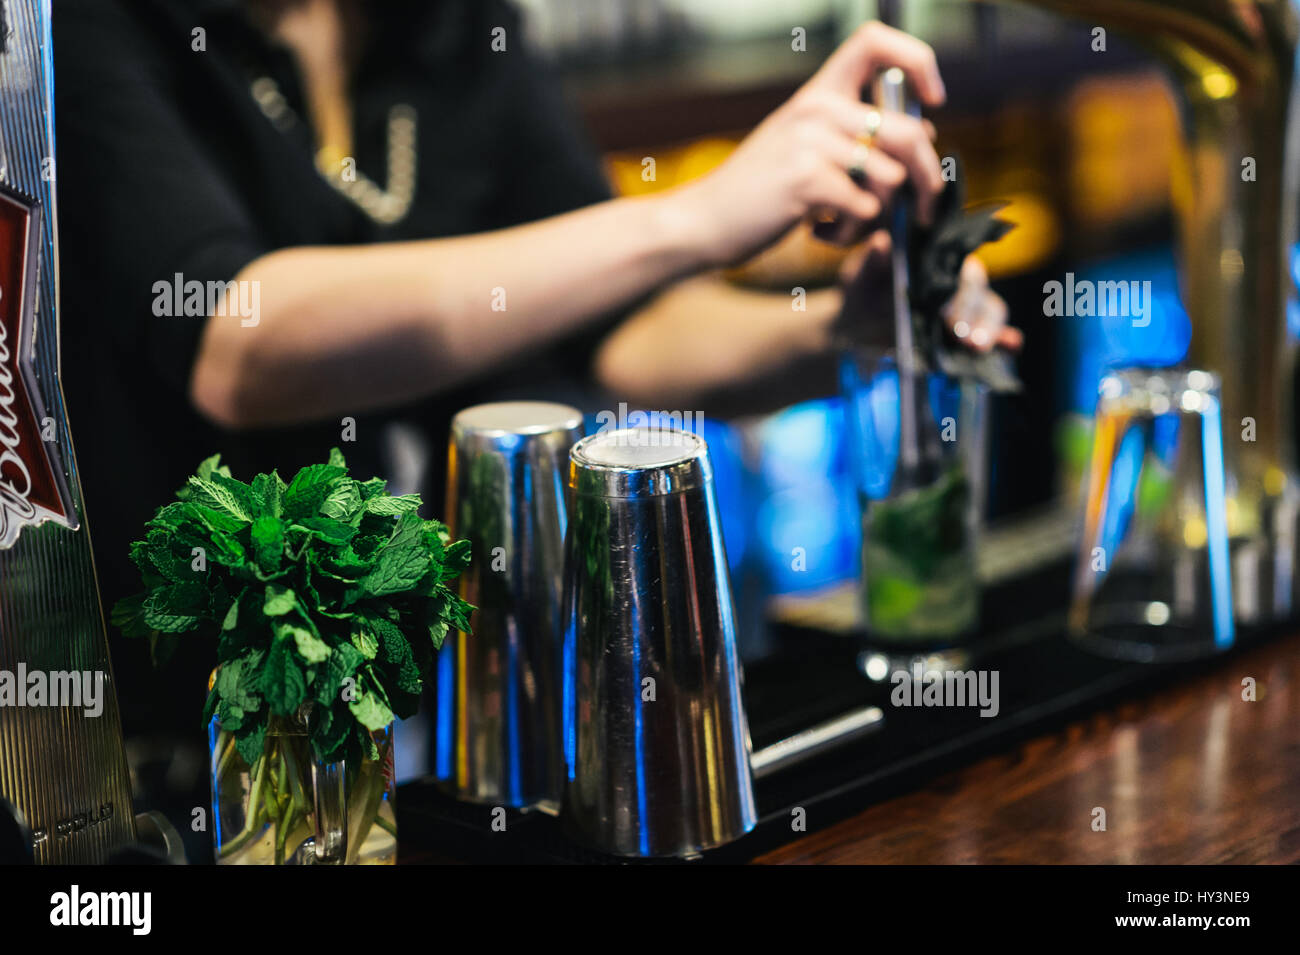 Bartender Preparing a Mojito Cocktail in a Tall Glass with Mint Leaves in the Foreground Stock Photo